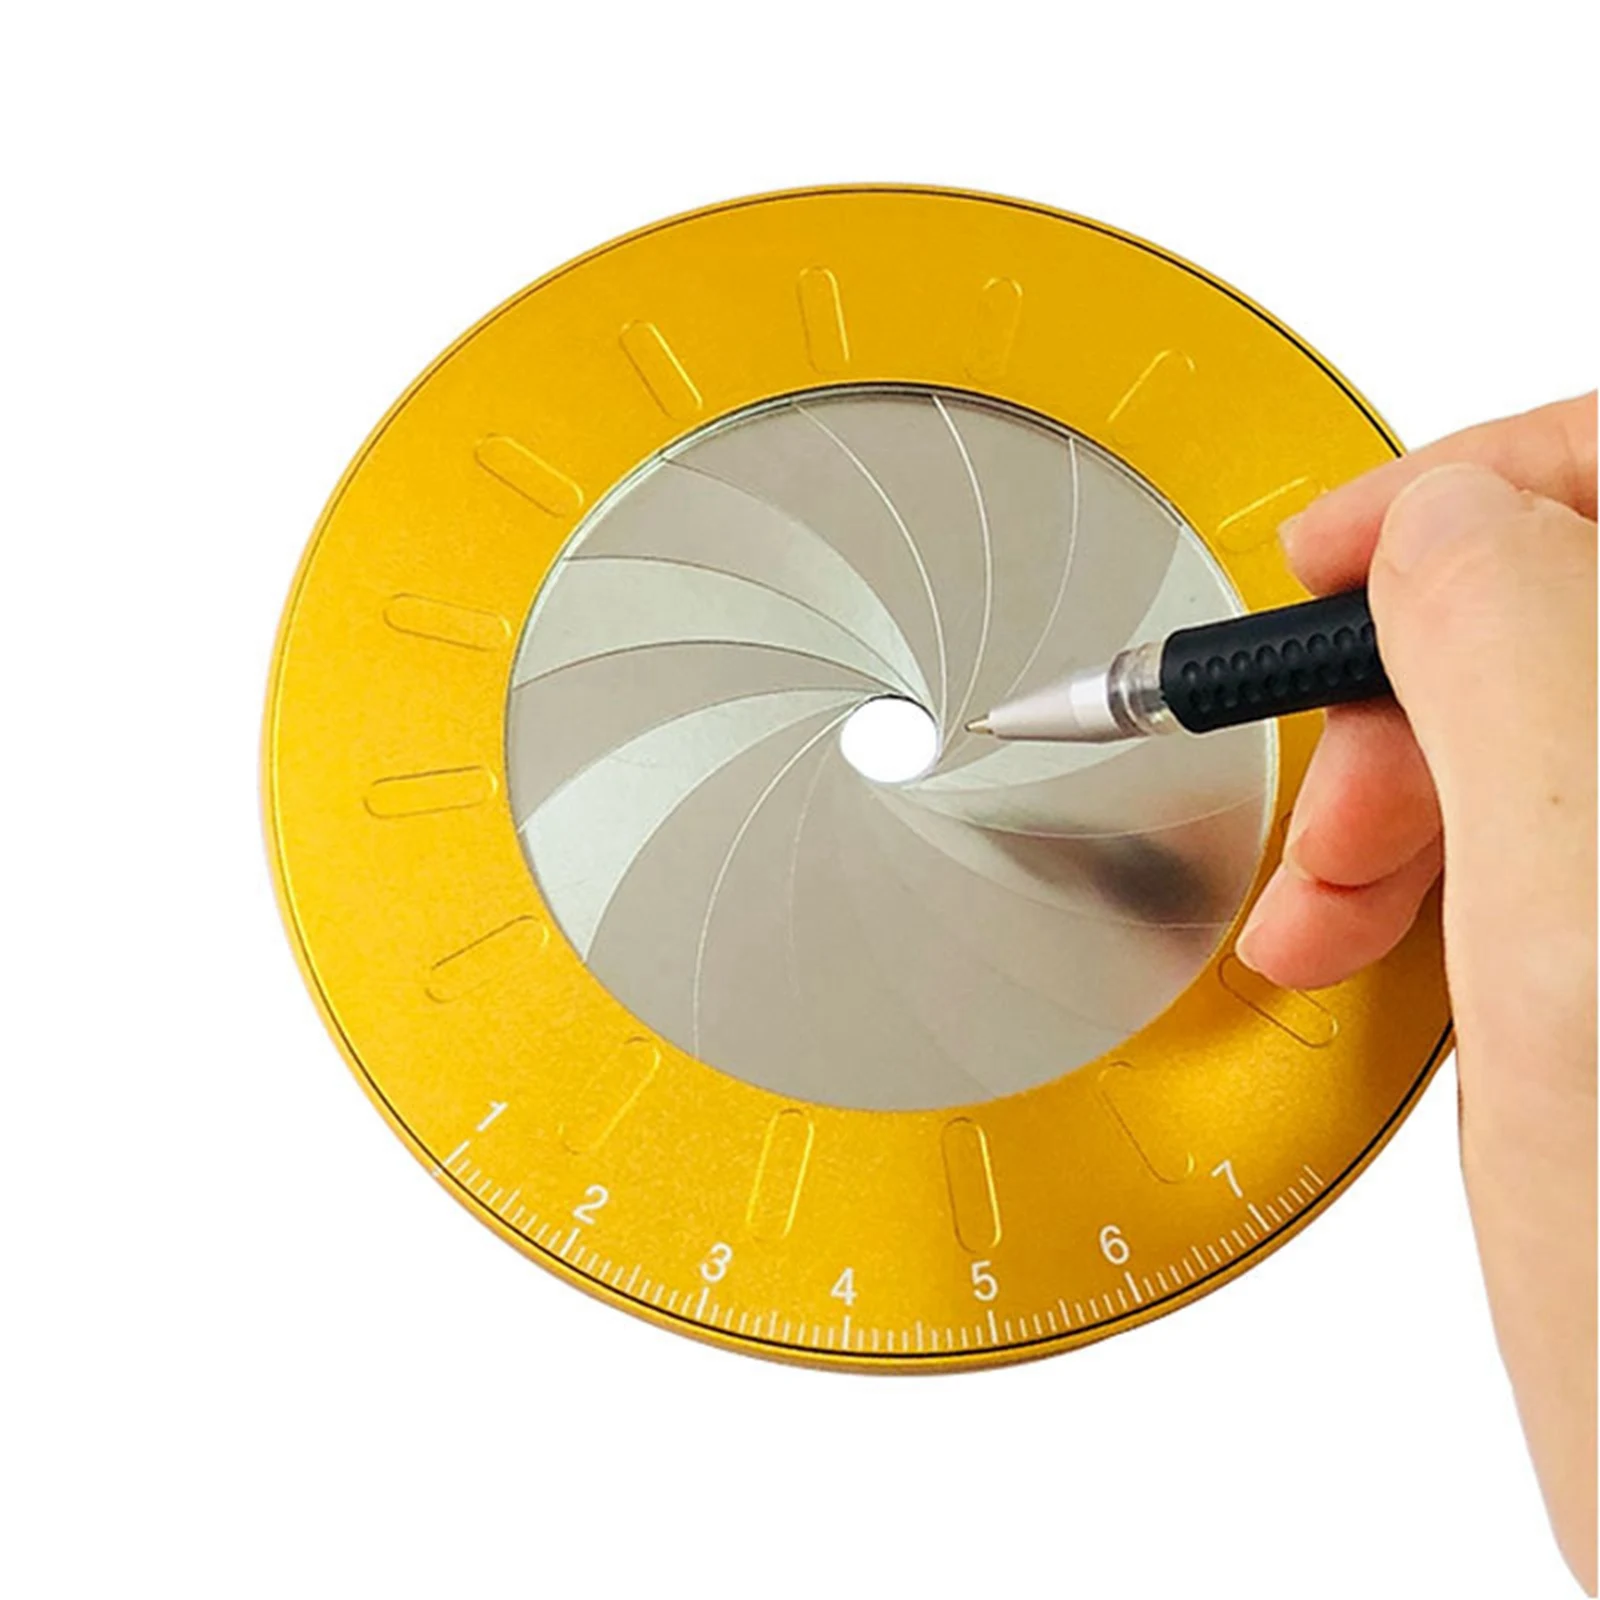 Round Stainless Steel Circle Drawing Tool School Ruler Template Art Design Geometry Compass Woodworking Drawing Drafting Ruler